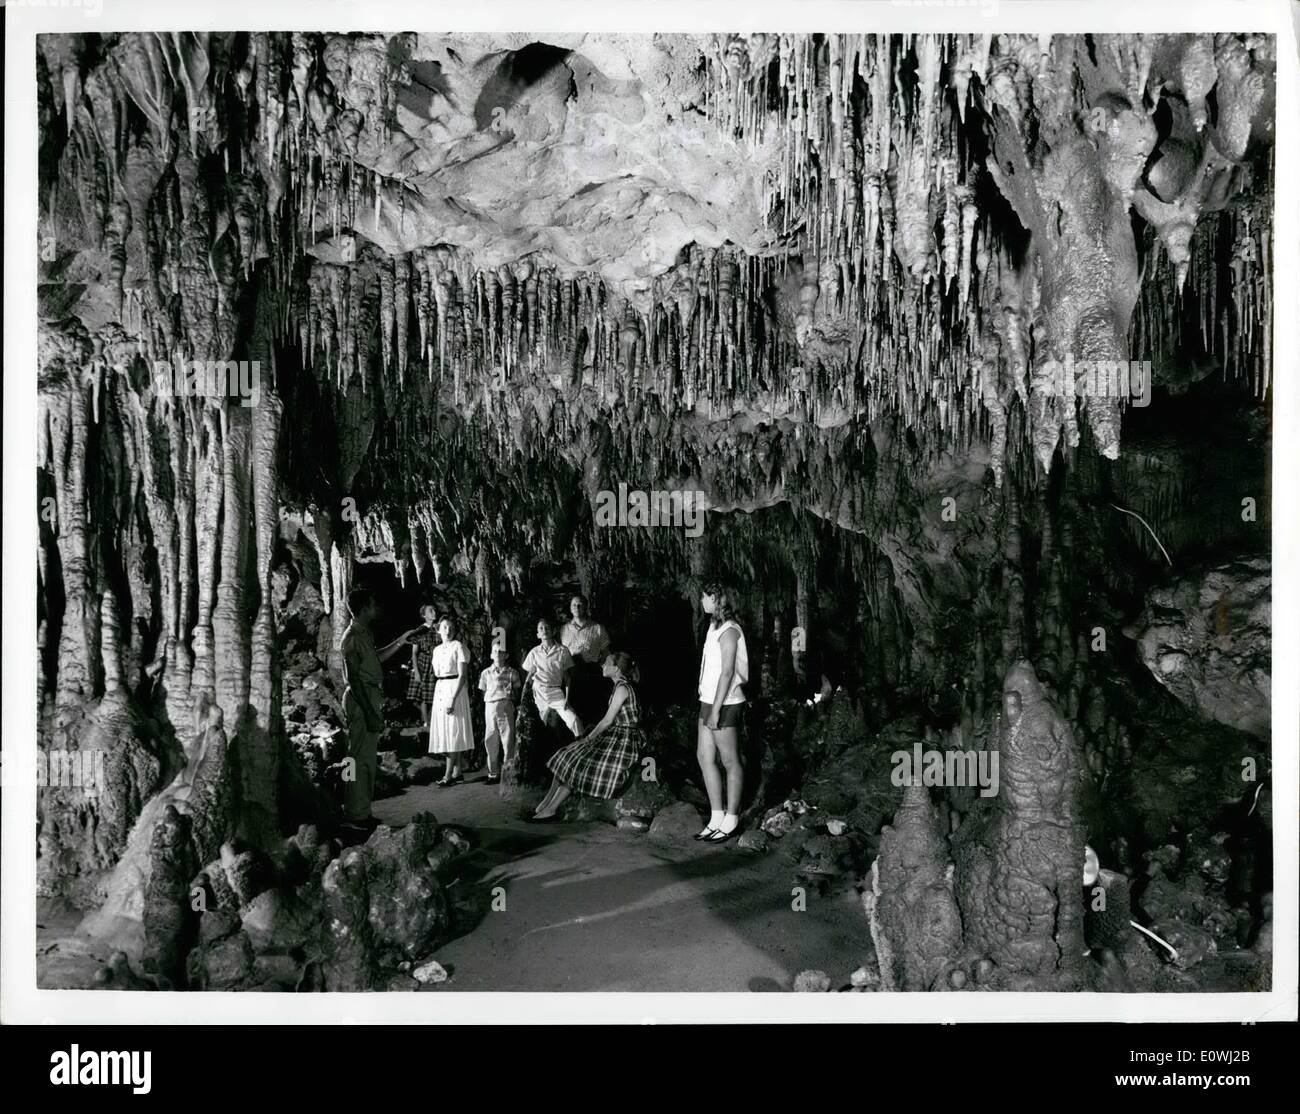 Mar. 03, 1963 - State Of Florida Development Commission Florida News Bureau Tallahassee, Florida Among the many state parks maintained by Florida at points of scenic and historical significance are the Florida Caverns, a network of caves of remarkable beauty. The caves were used by Indians in time of warfare and later used by Southern supporters during the War Between the States. Stock Photo